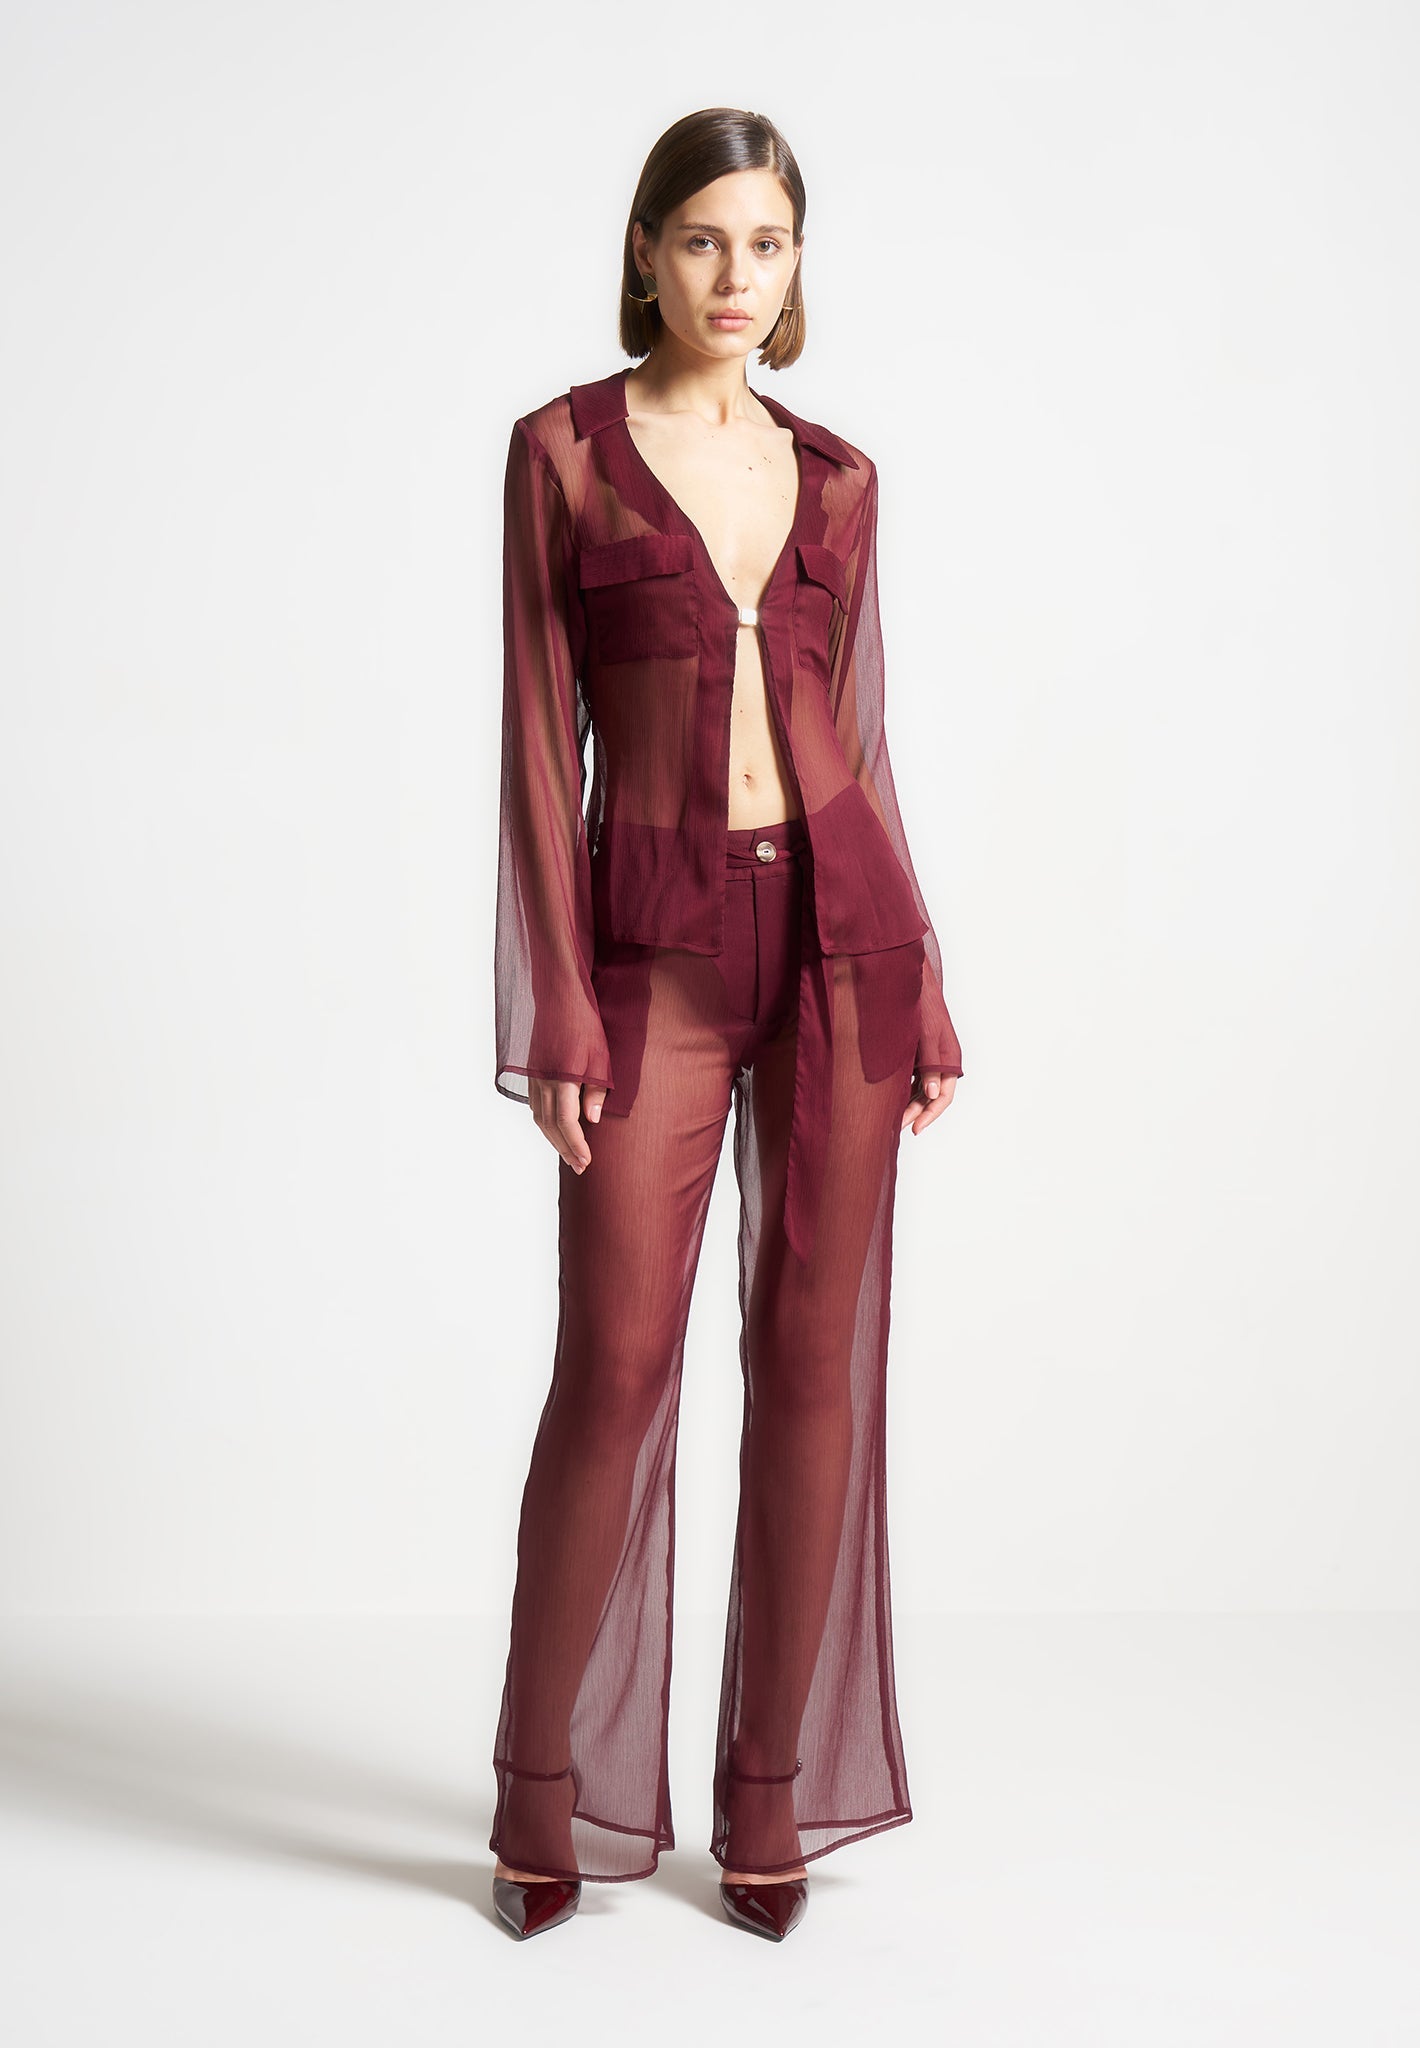 sheer-shirt-with-clasp-wine-red